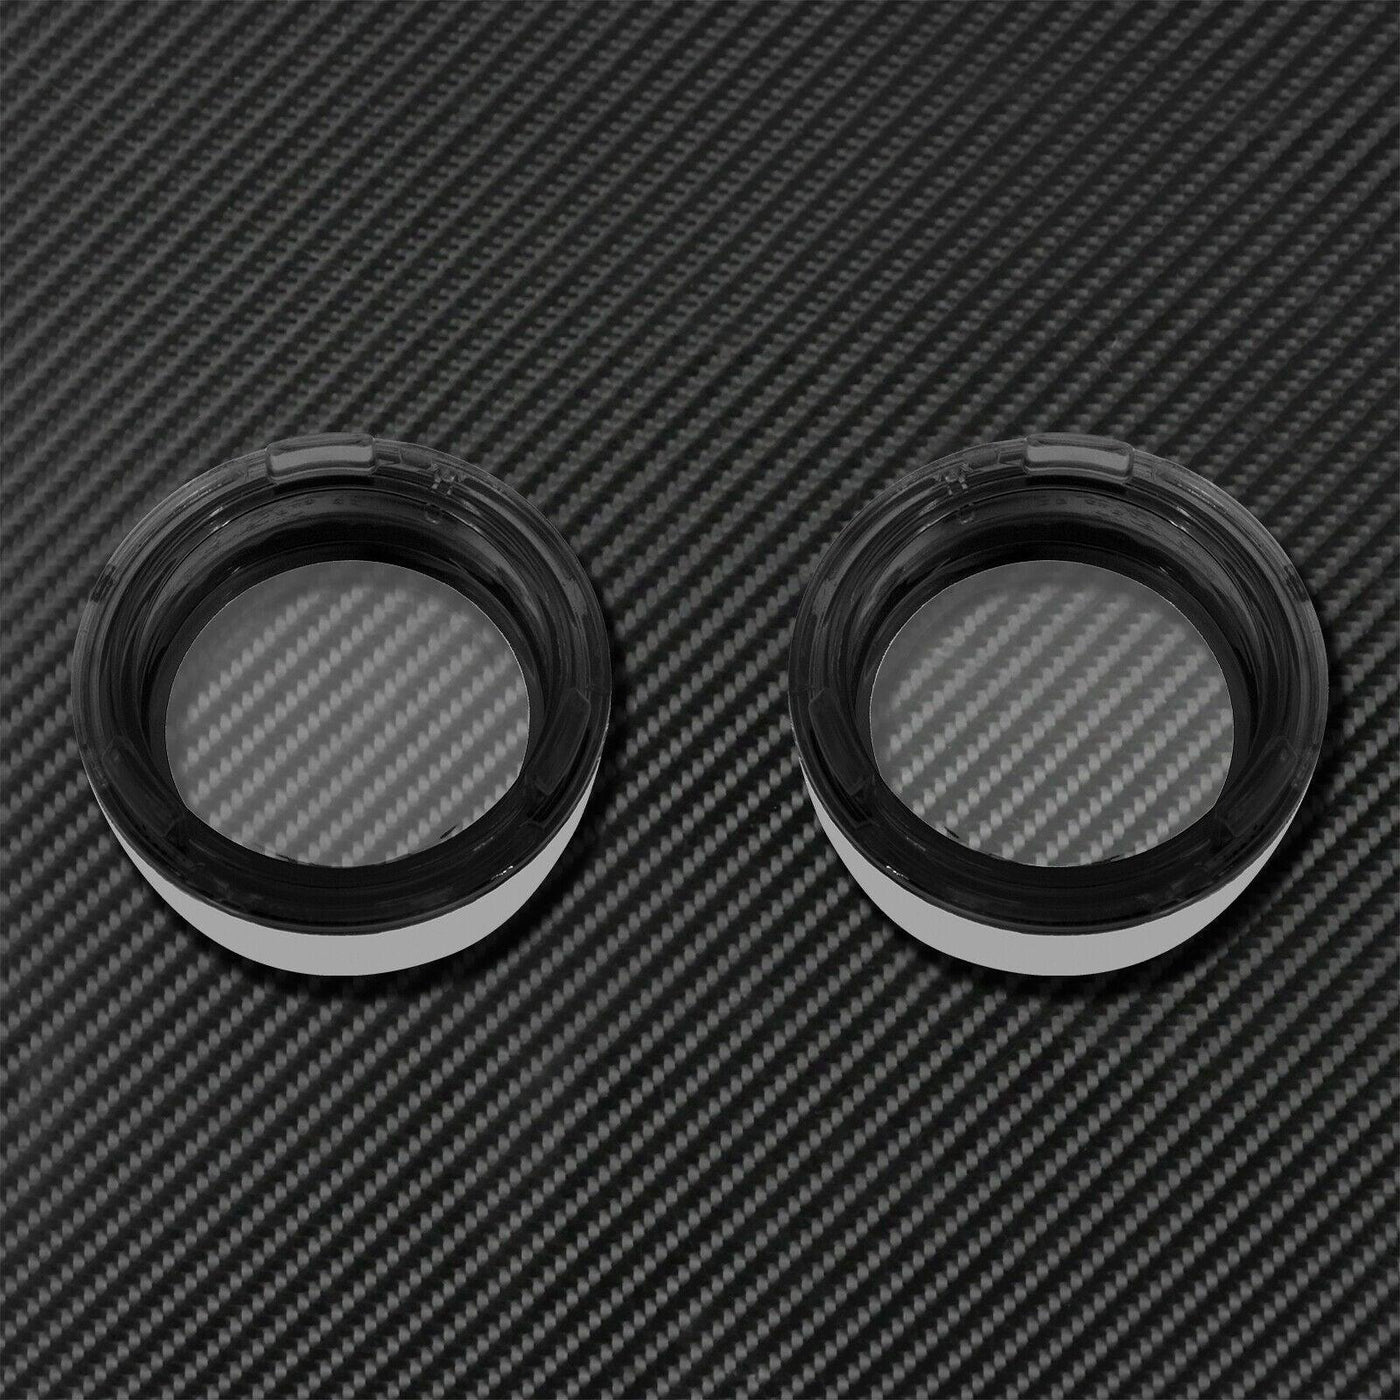 Chrome Clear Trim Ring Bullet Turn Signal Lens Cover Fit For Harley Softail Dyna - Moto Life Products